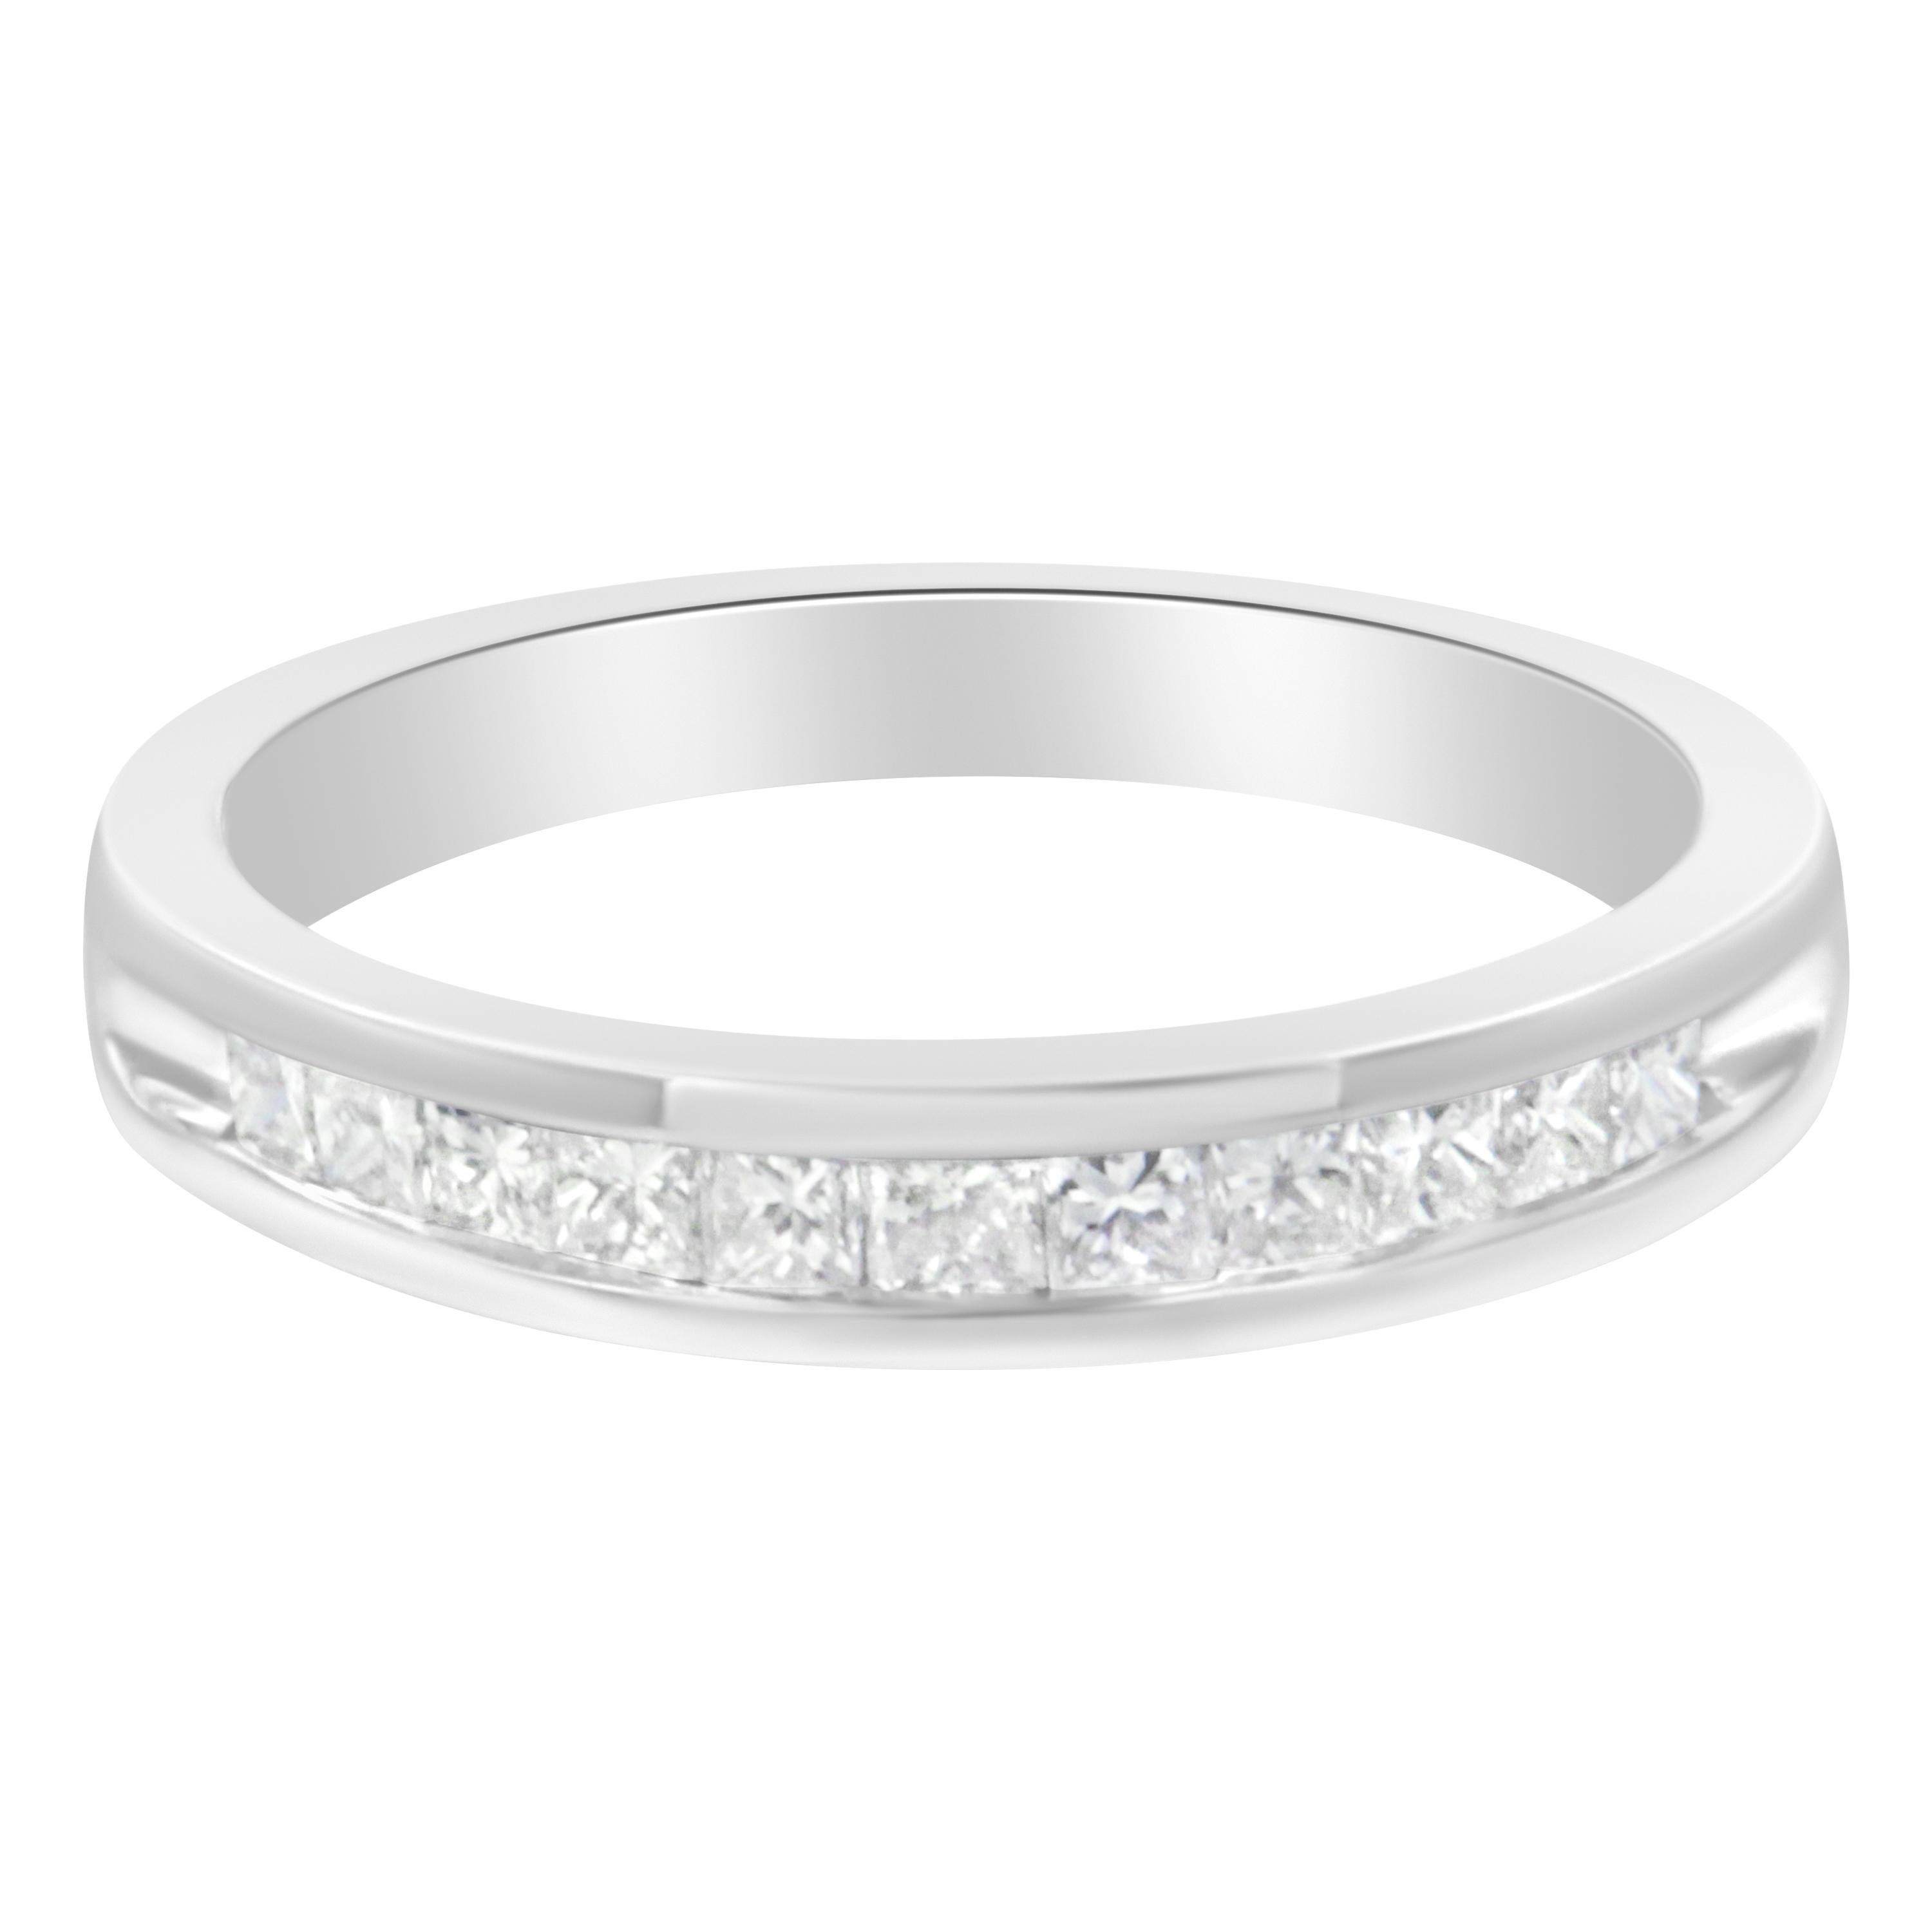 Elegant and timeless, this diamond wedding band features 1/2 carat total weight of diamonds with an astonishing eleven individual stones. This exquisite IGI certified 18 karat white gold wedding ring has eleven beautiful square, princess cut white